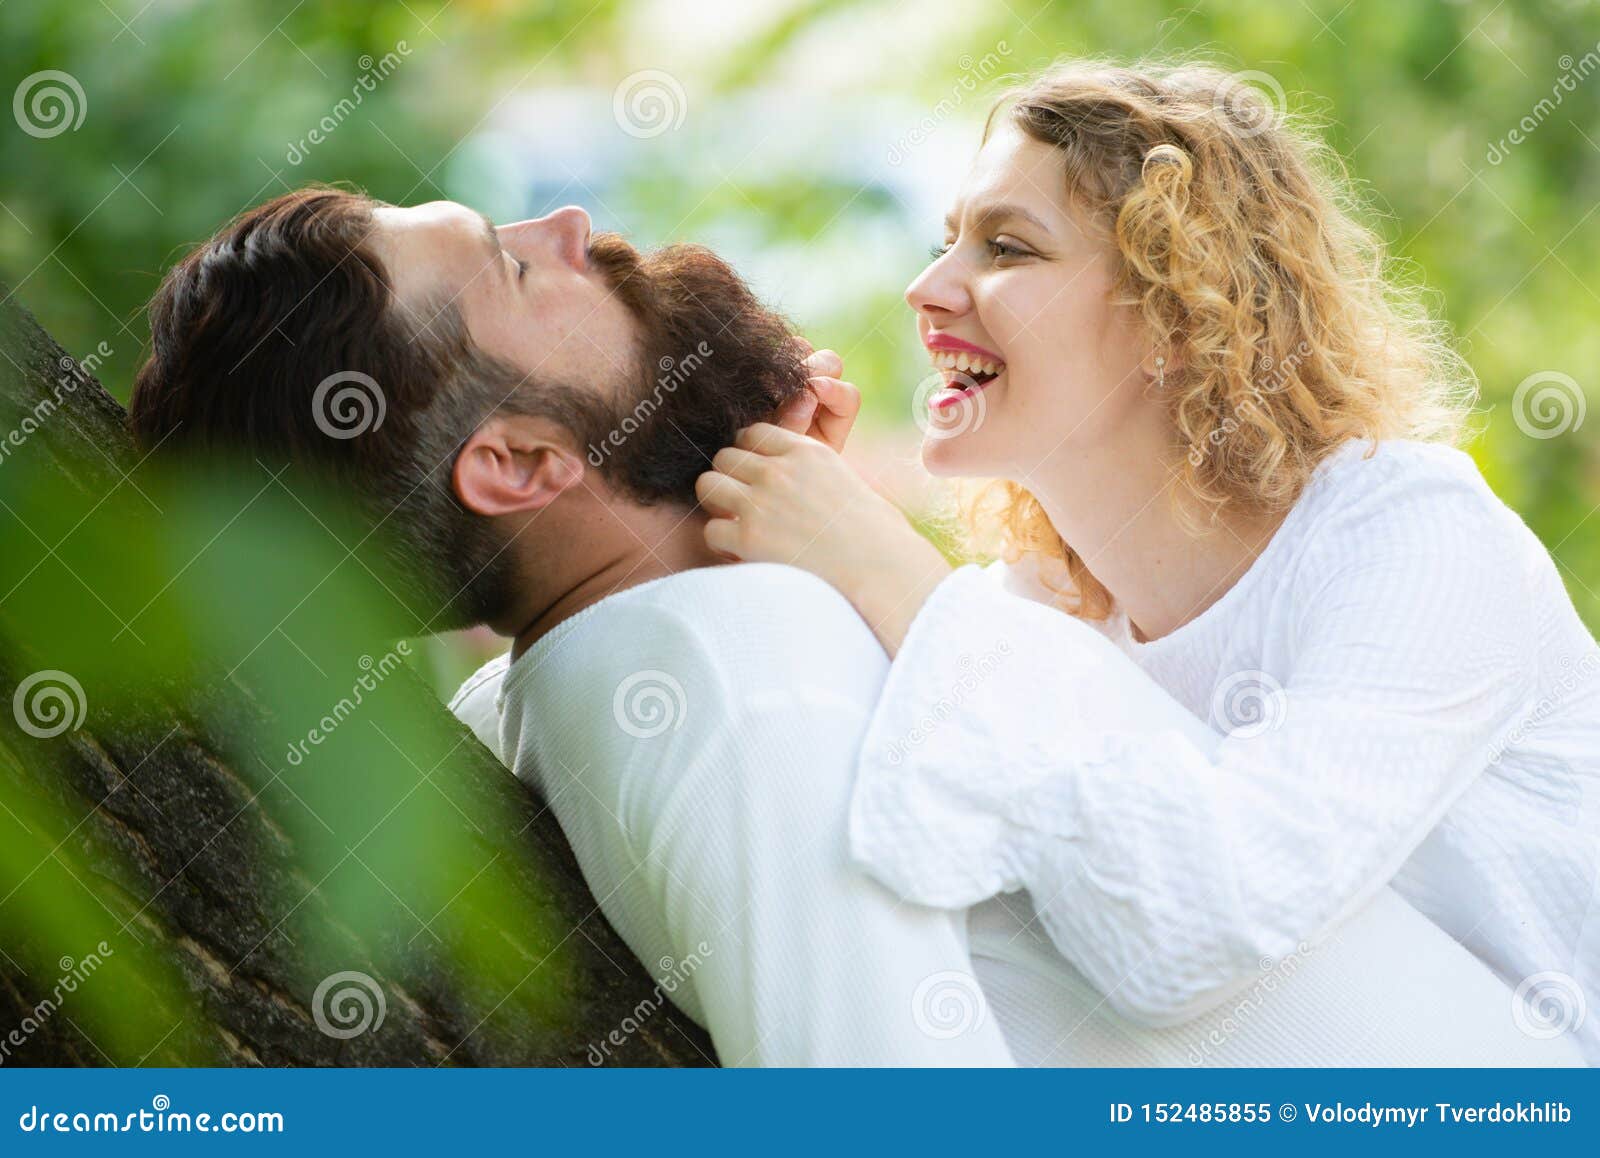 Passionate Woman with Lover Feeling Pleasure Having photo